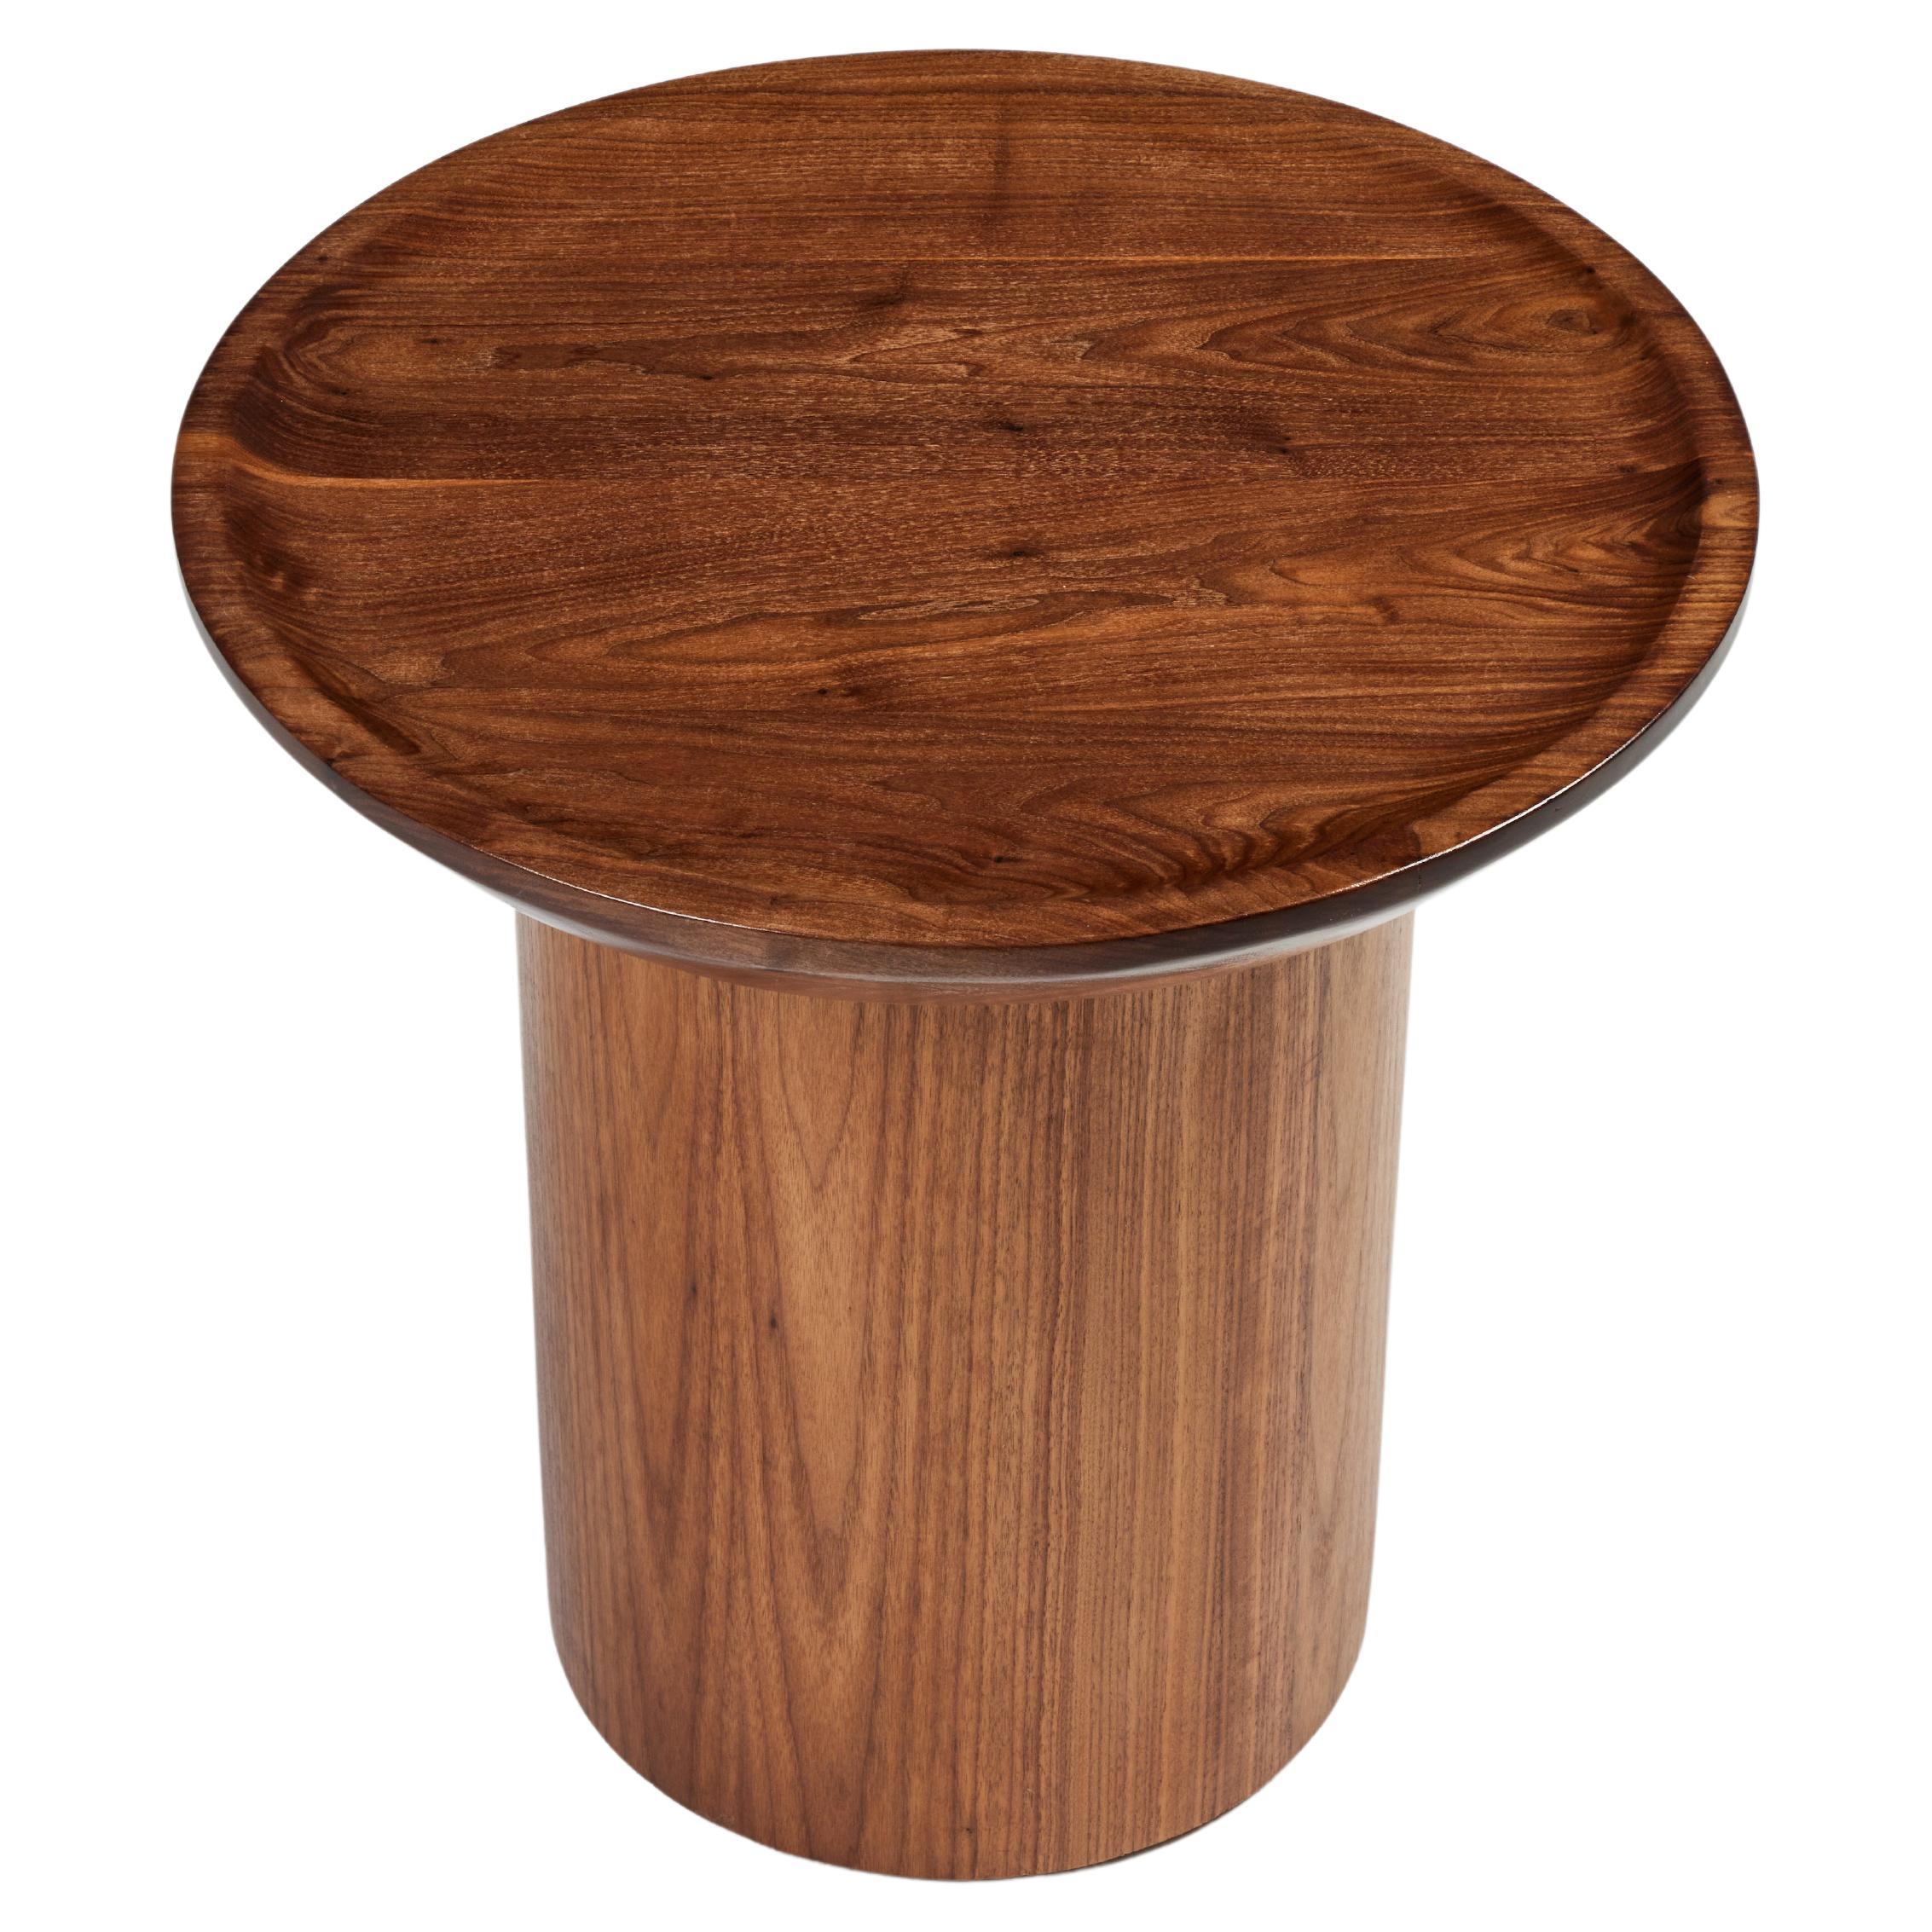 Martin & Brockett 's Findley Round Tall Side Table features the Findley Collection's signature carved, curved lip edge on the table top and a round pedestal base. Shown here in Walnut.

H 22.5 in. x D 20 in.

Available for order in additional